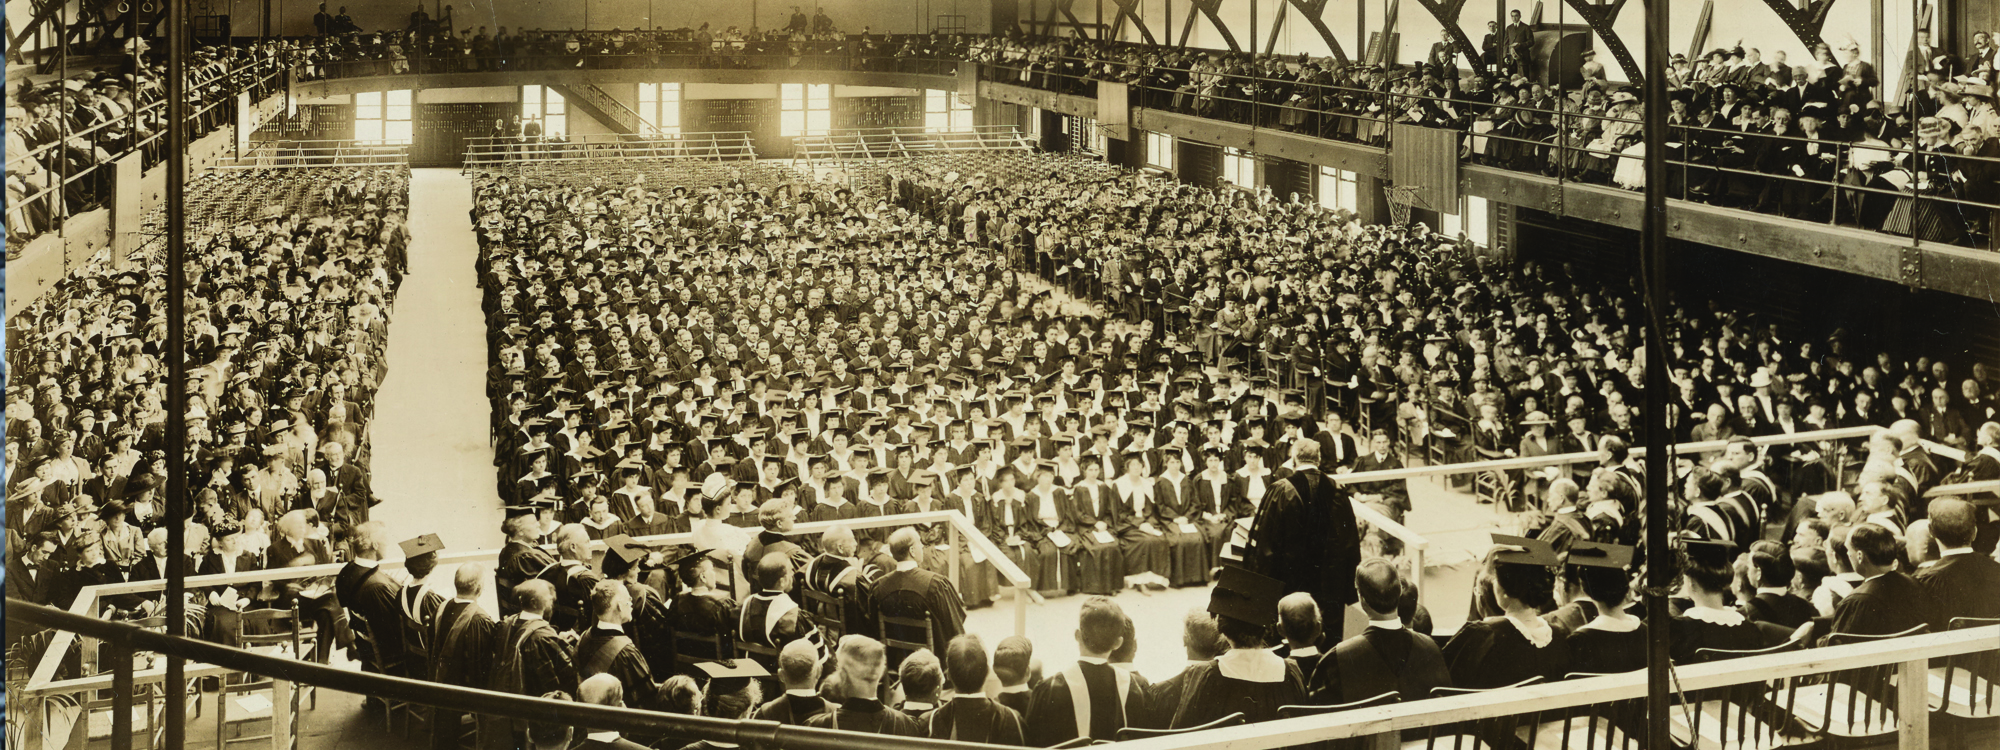 Photograph of Chancellor James Roscoe Day speaking at Commencement in Archbold Gymnasium, 1916